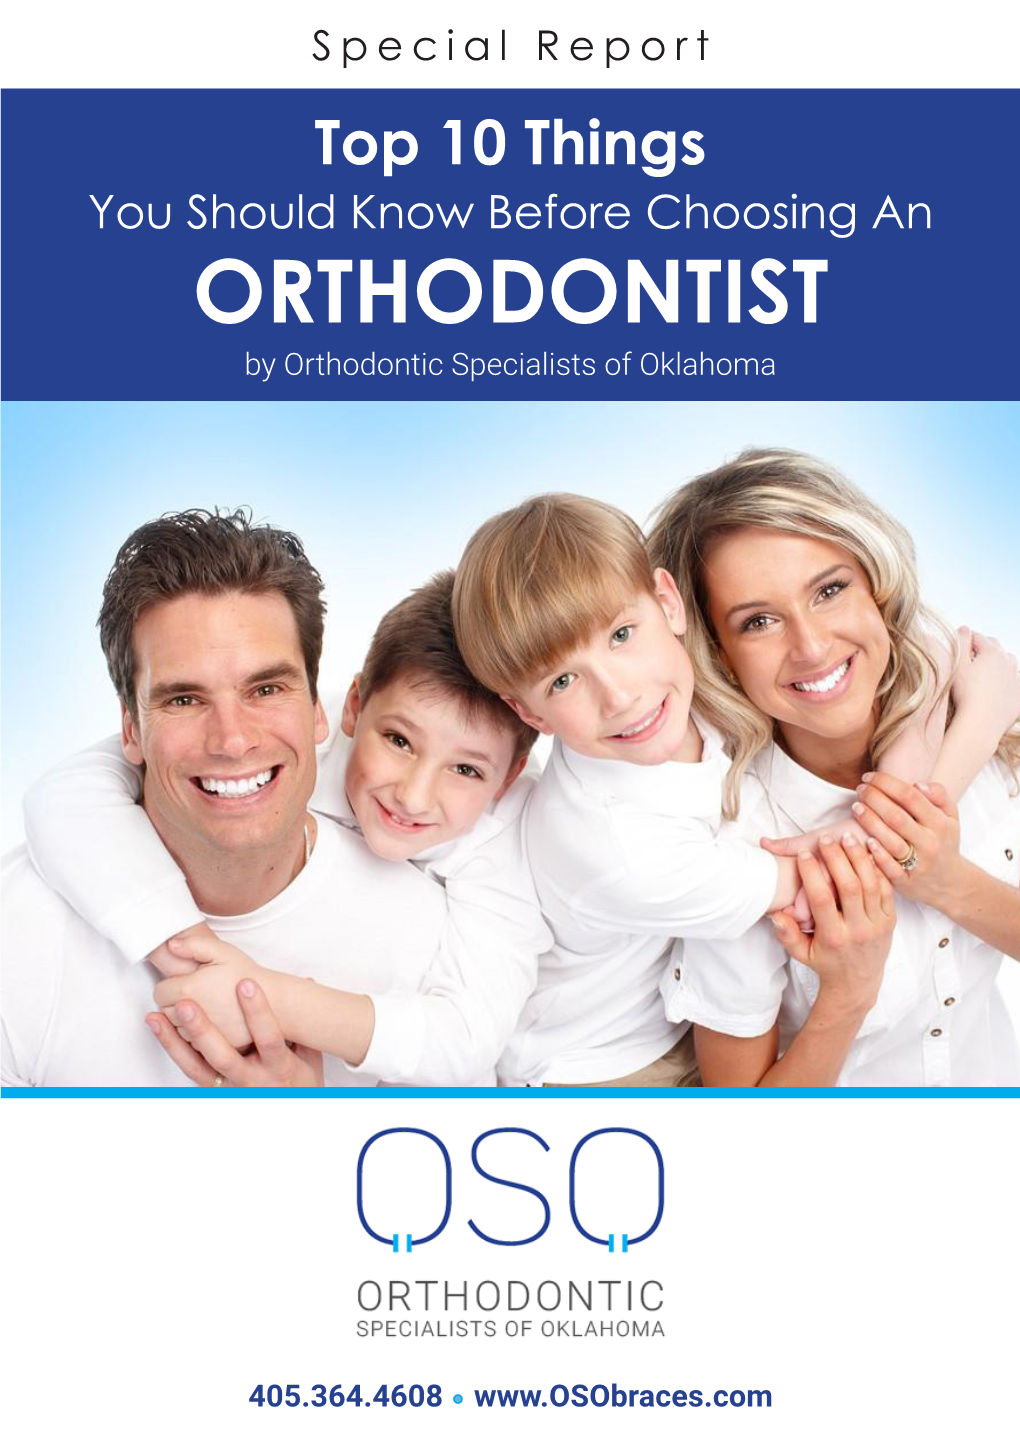 ORTHODONTIST by Orthodontic Specialists of Oklahoma